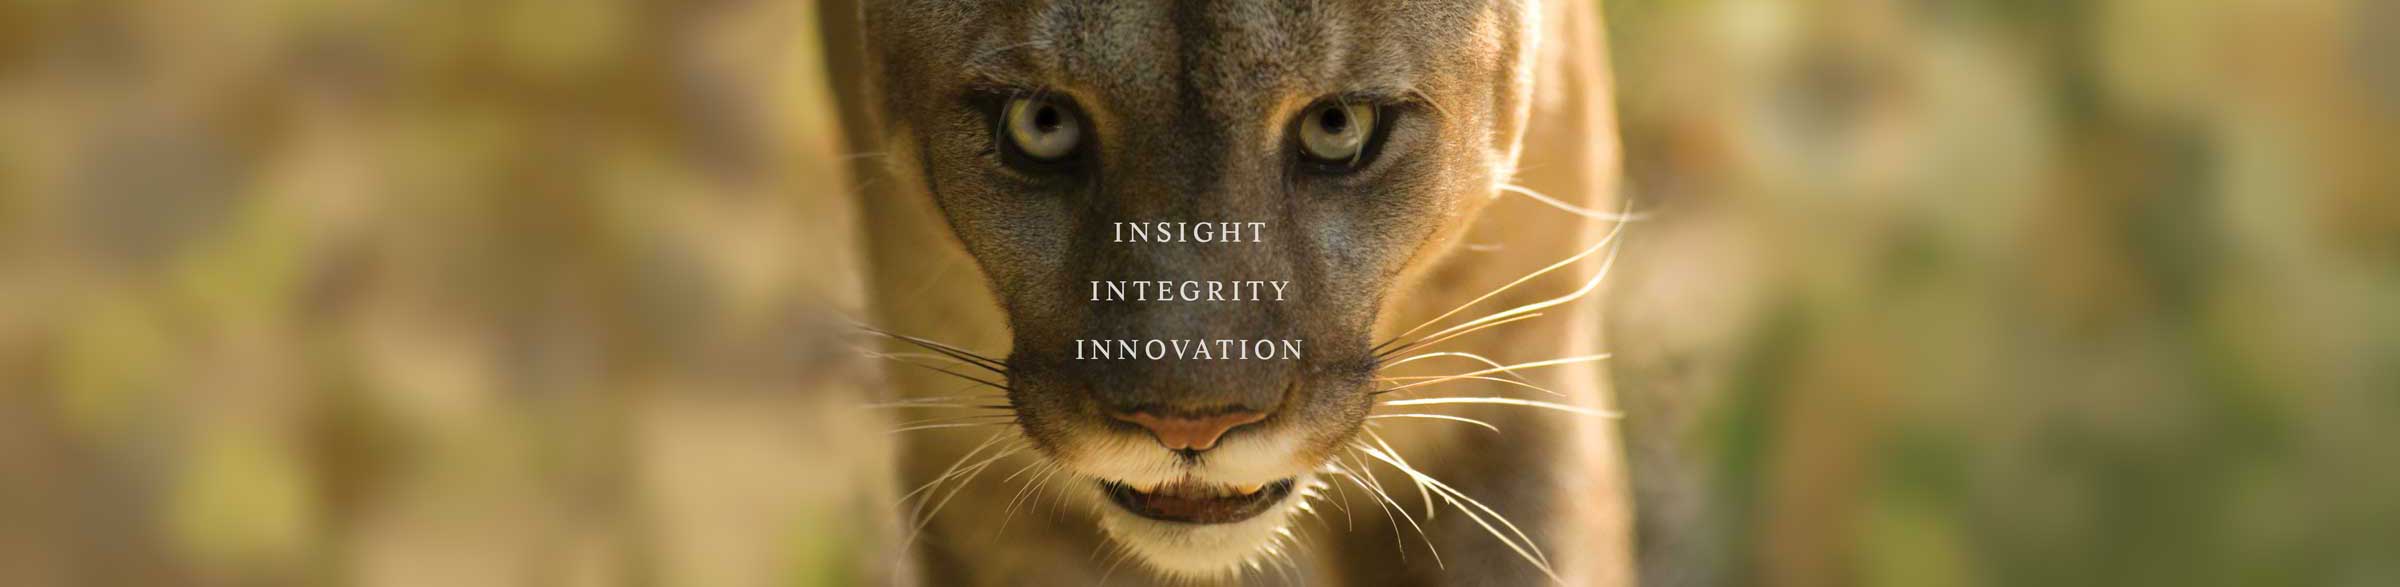 The Florida panther's muzzle and green eyes with an overlay of the words "insight, integrity, innovation"